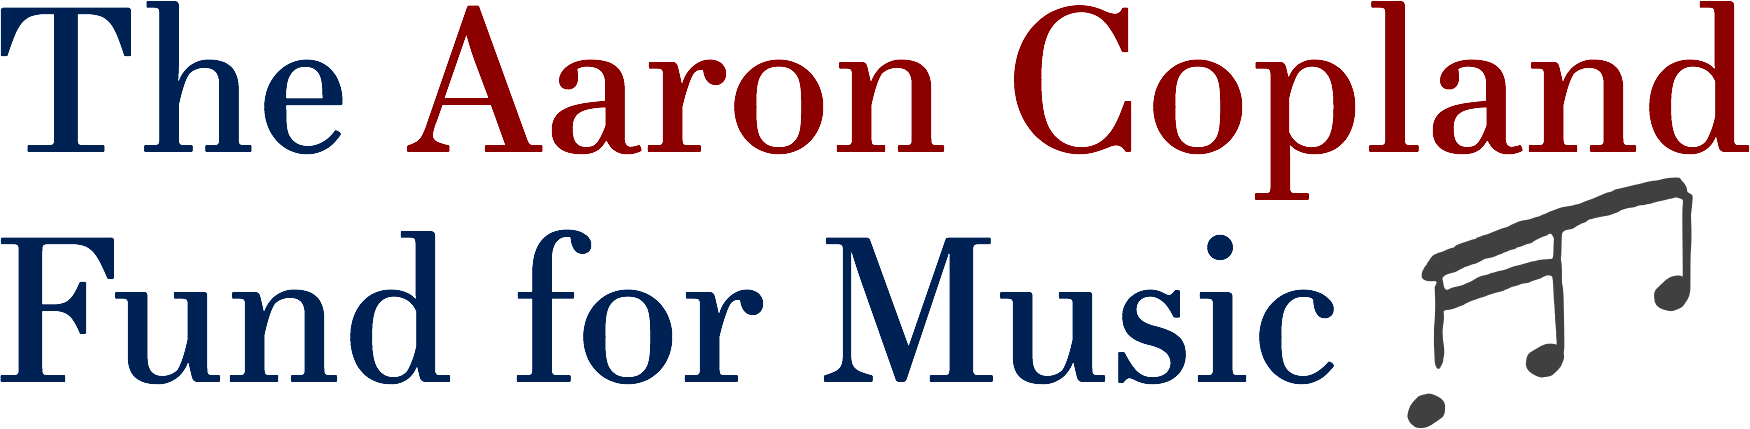 Copland Compact Color - Aaron Copland Fund For Music (1750x429), Png Download